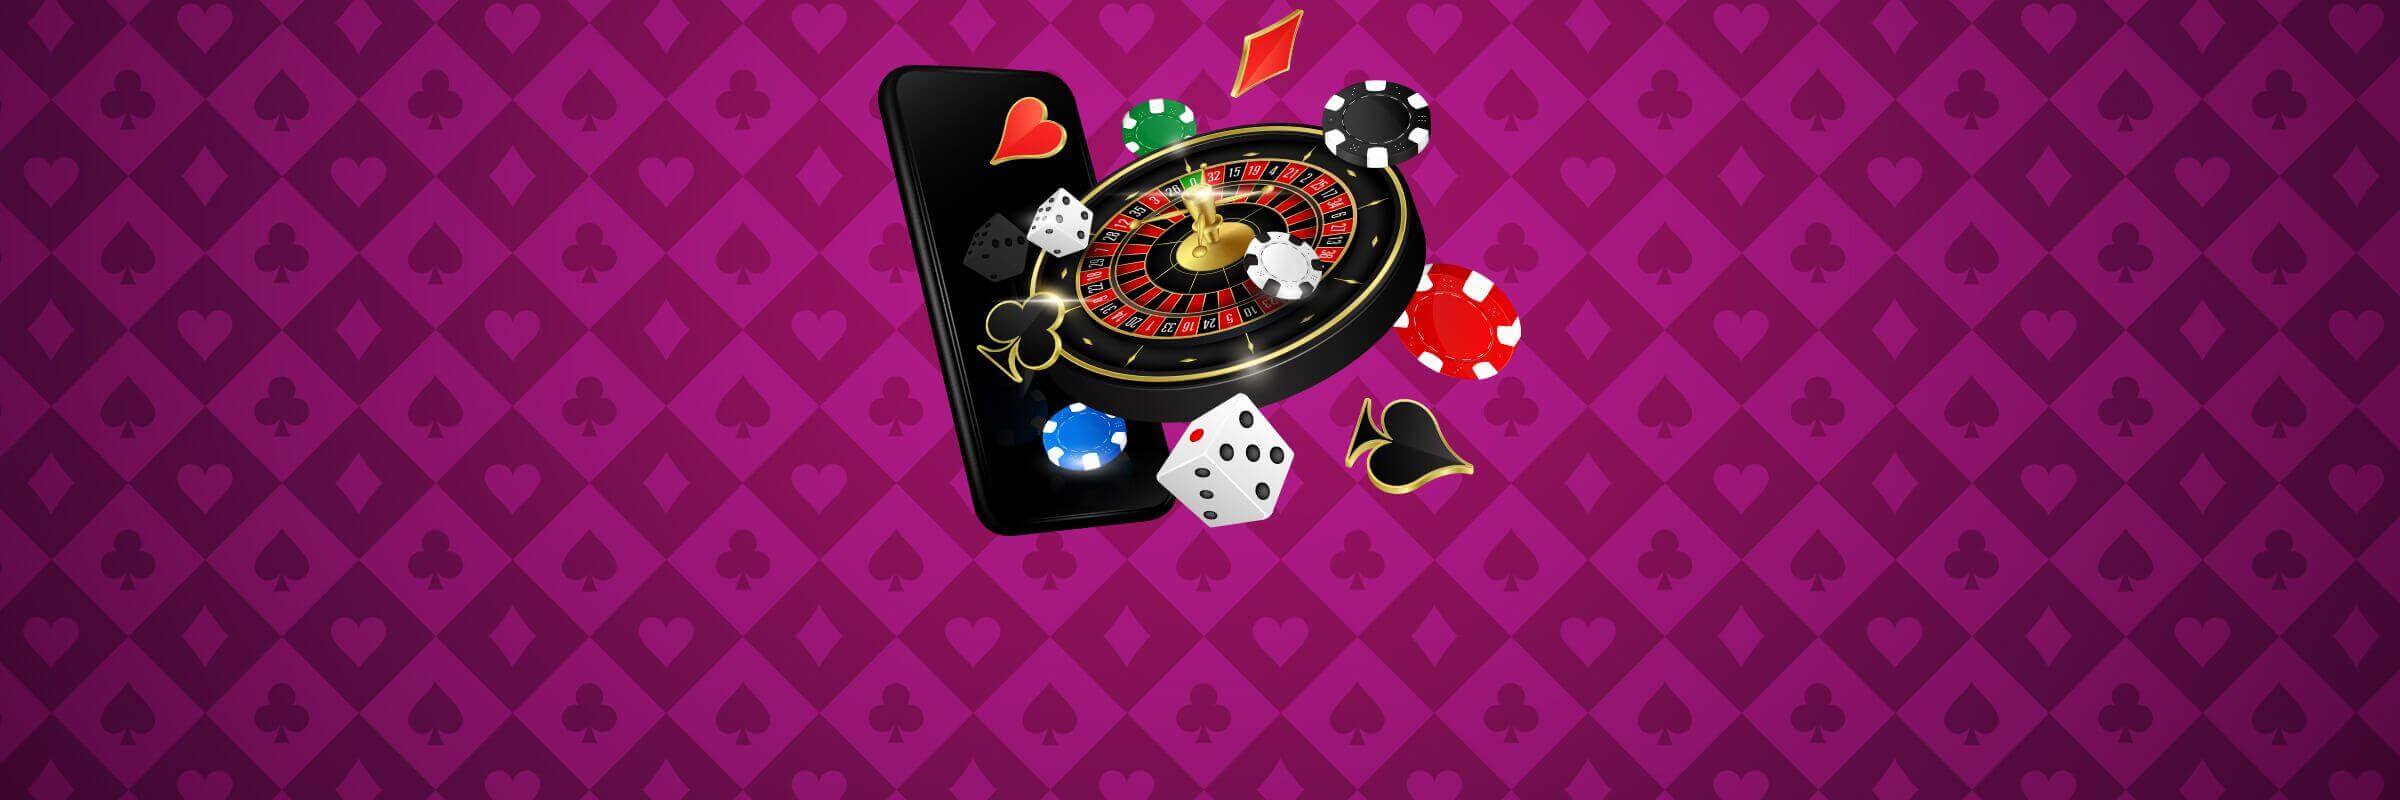 animation of slot games coming out of a iphone